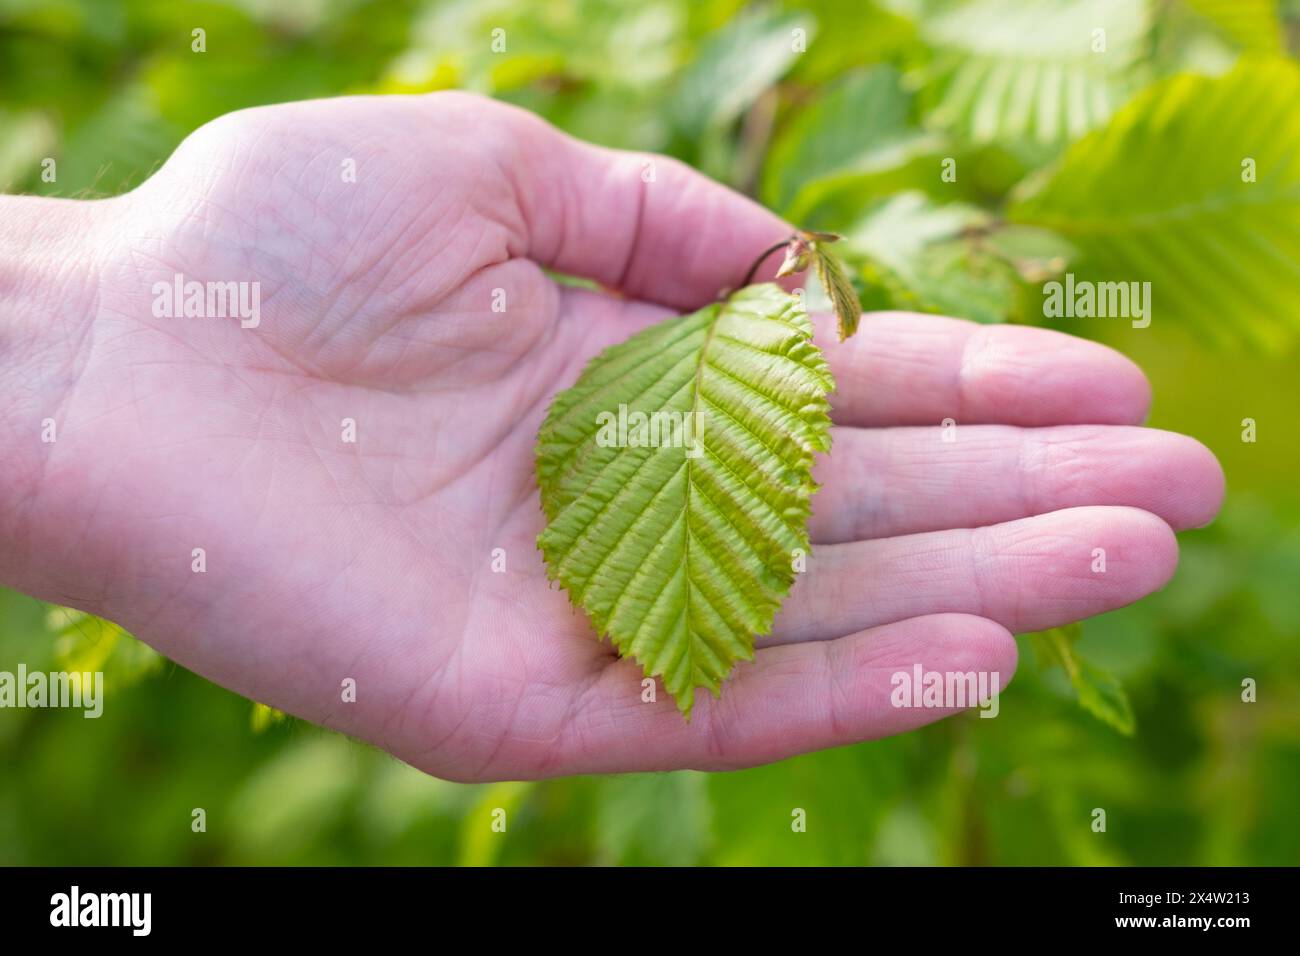 male hands holding green leaf, active lifestyle for health, rejuvenating power nature, holistic approach to health, Eco-friendly living Stock Photo